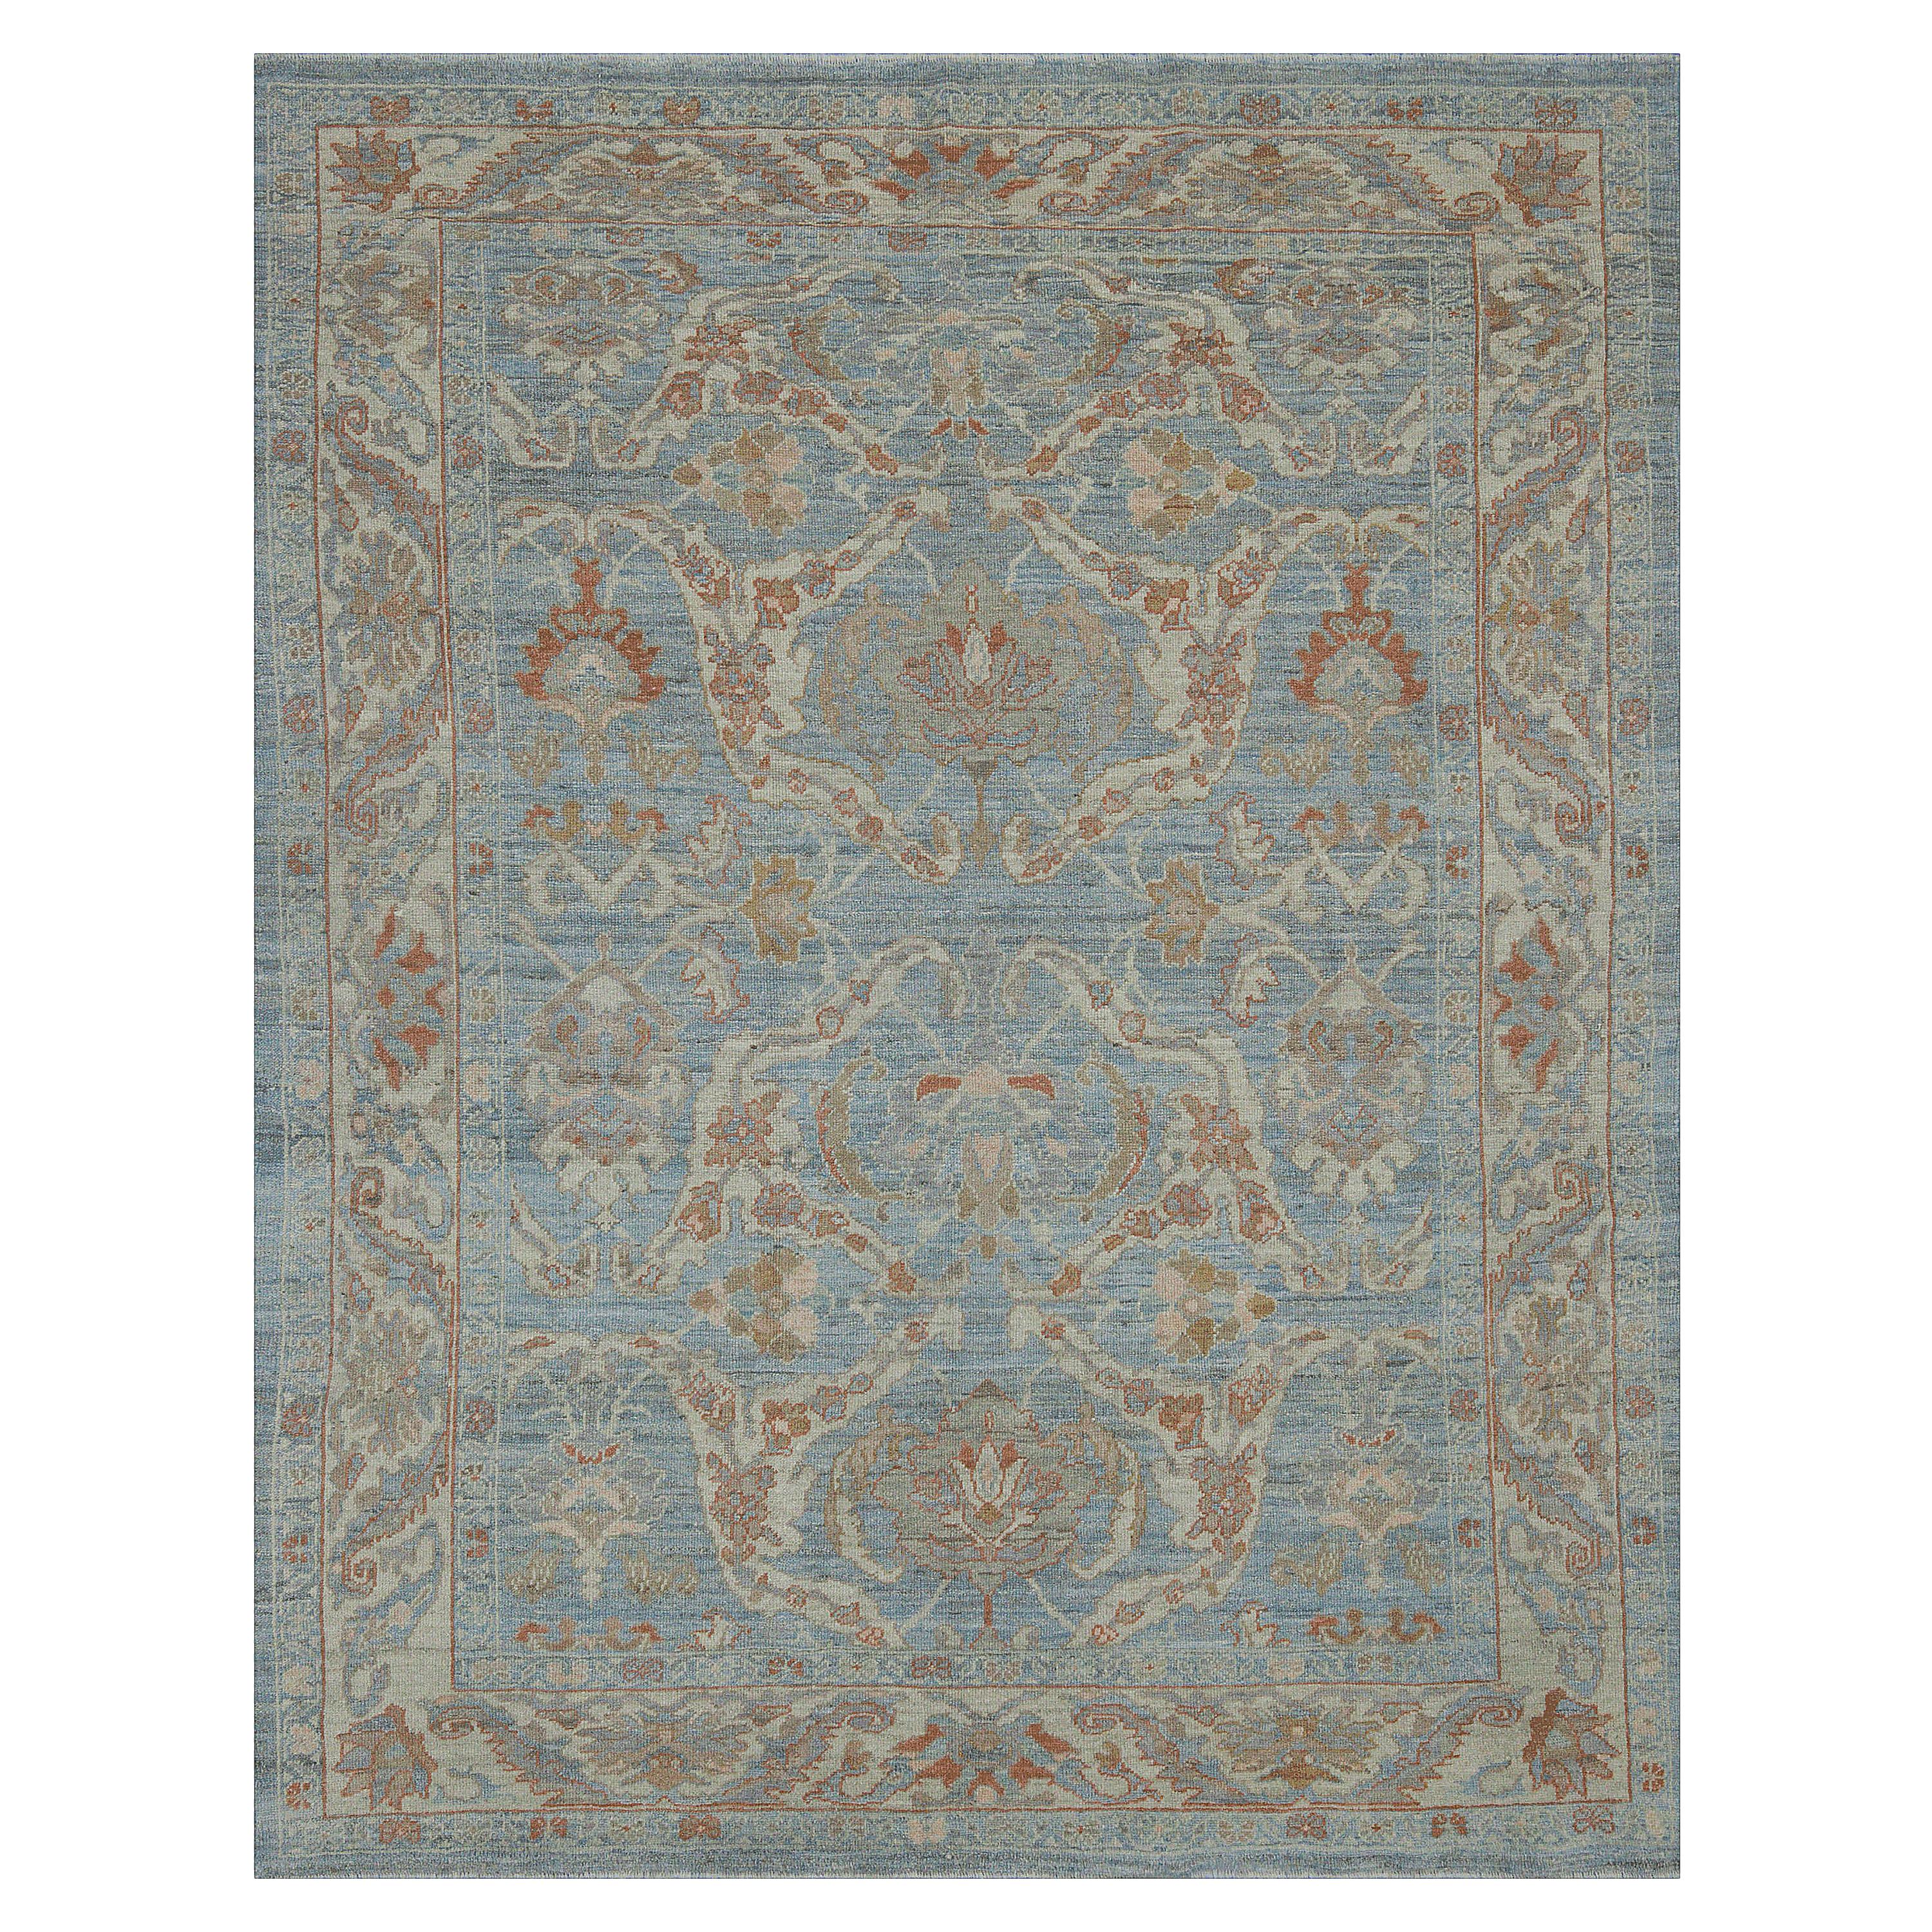 Contemporary Oushak Rug with Blue Field and Floral Patterns in Beige and Brown For Sale